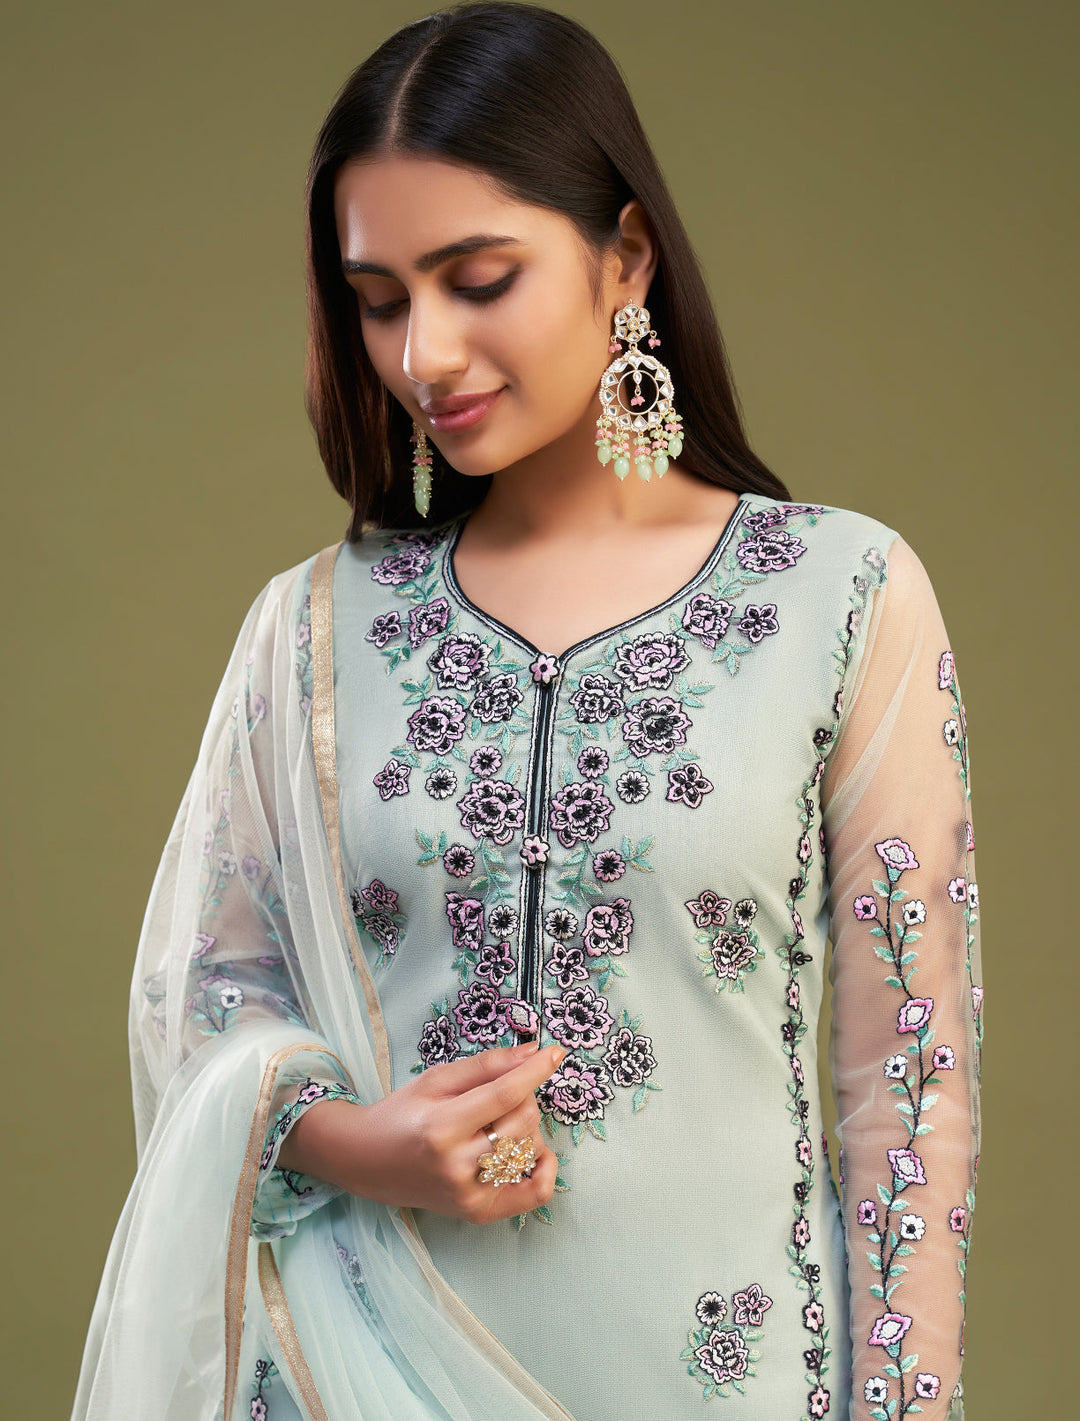 Elegant Blue Salwar Suit with Exquisite Multi-Thread Embroidery for Weddings & Parties